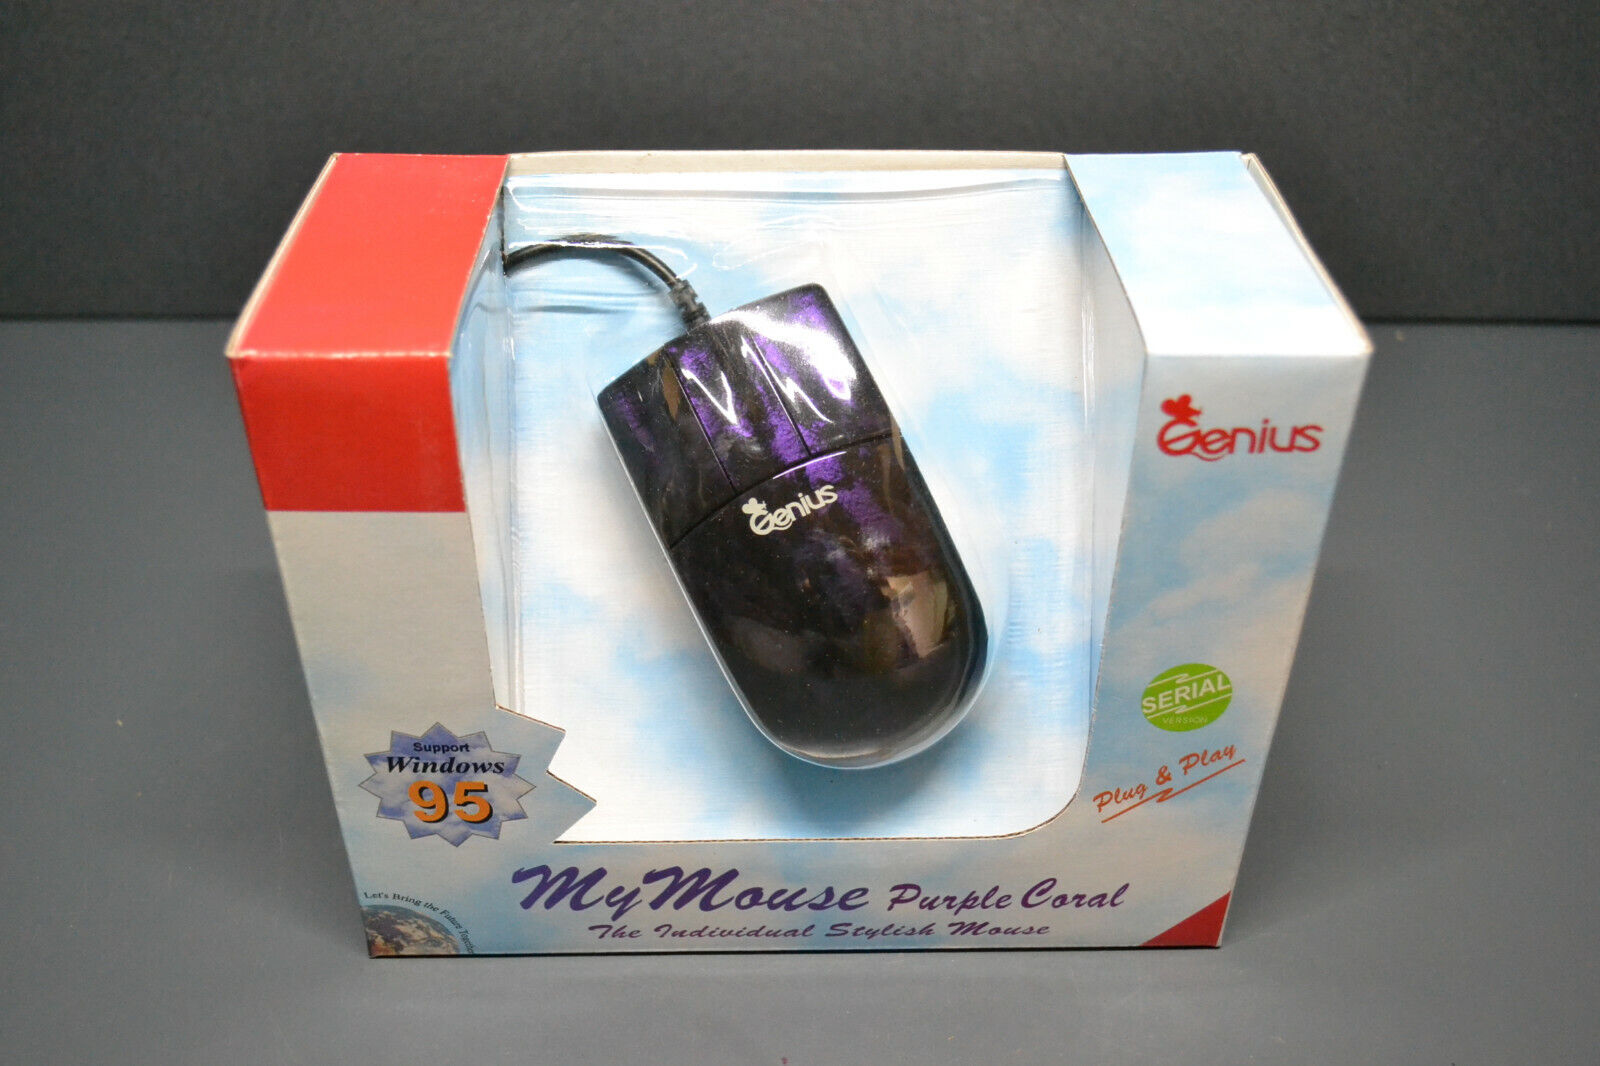 Vintage new Genius Mymouse Purple Coral serial mouse for windows 3.1 95 NT